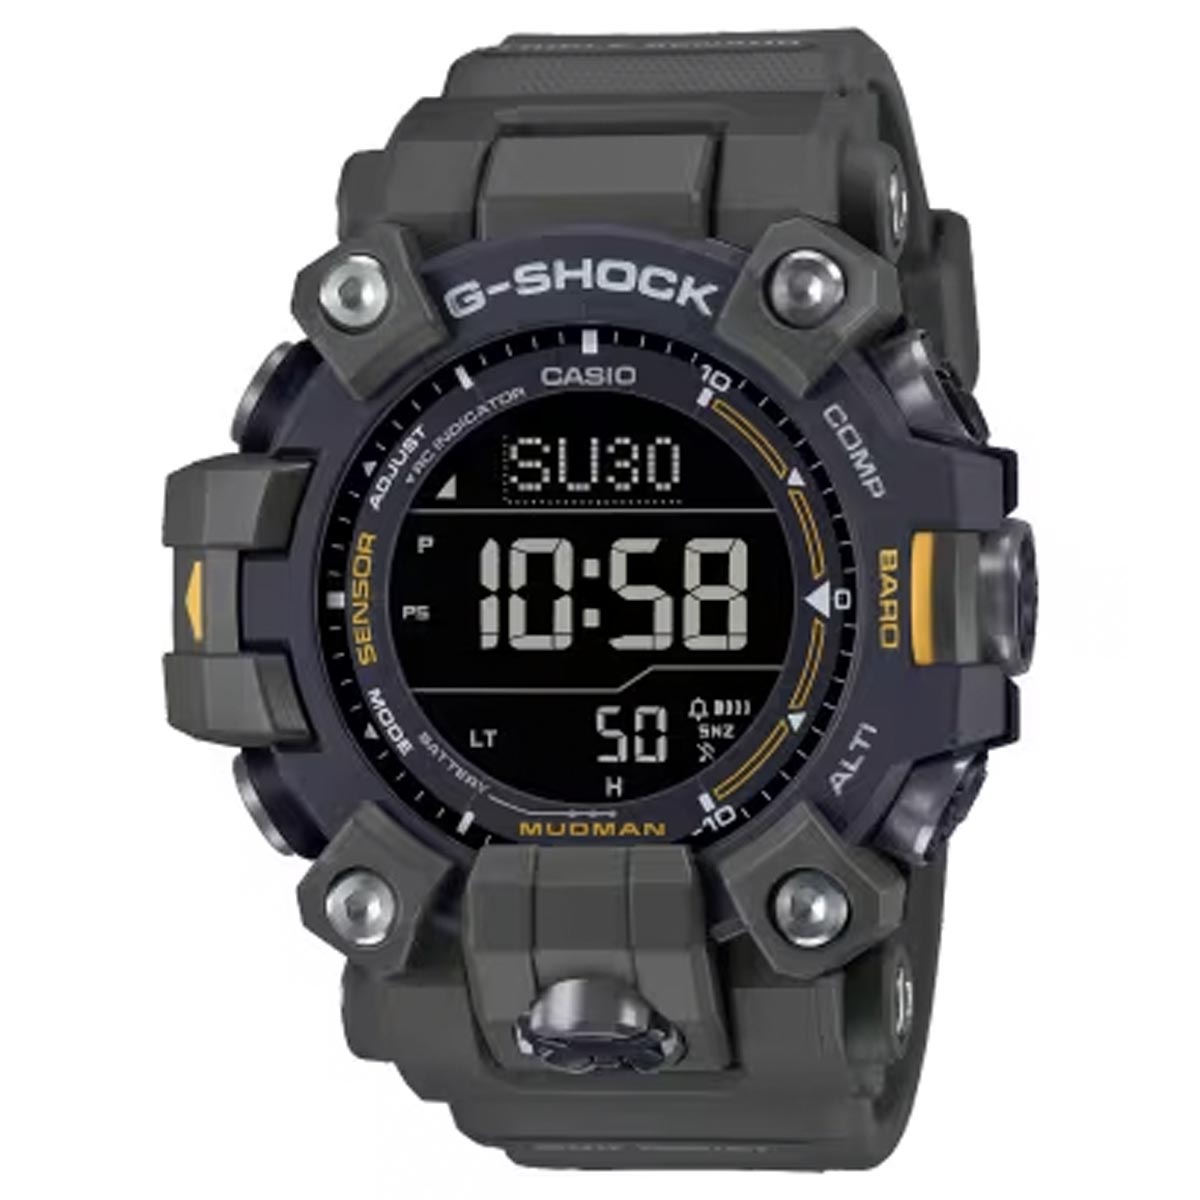 G Shock Mudman Mens Watch with Black Dial and Dark Green Resin Strap (solar movement)